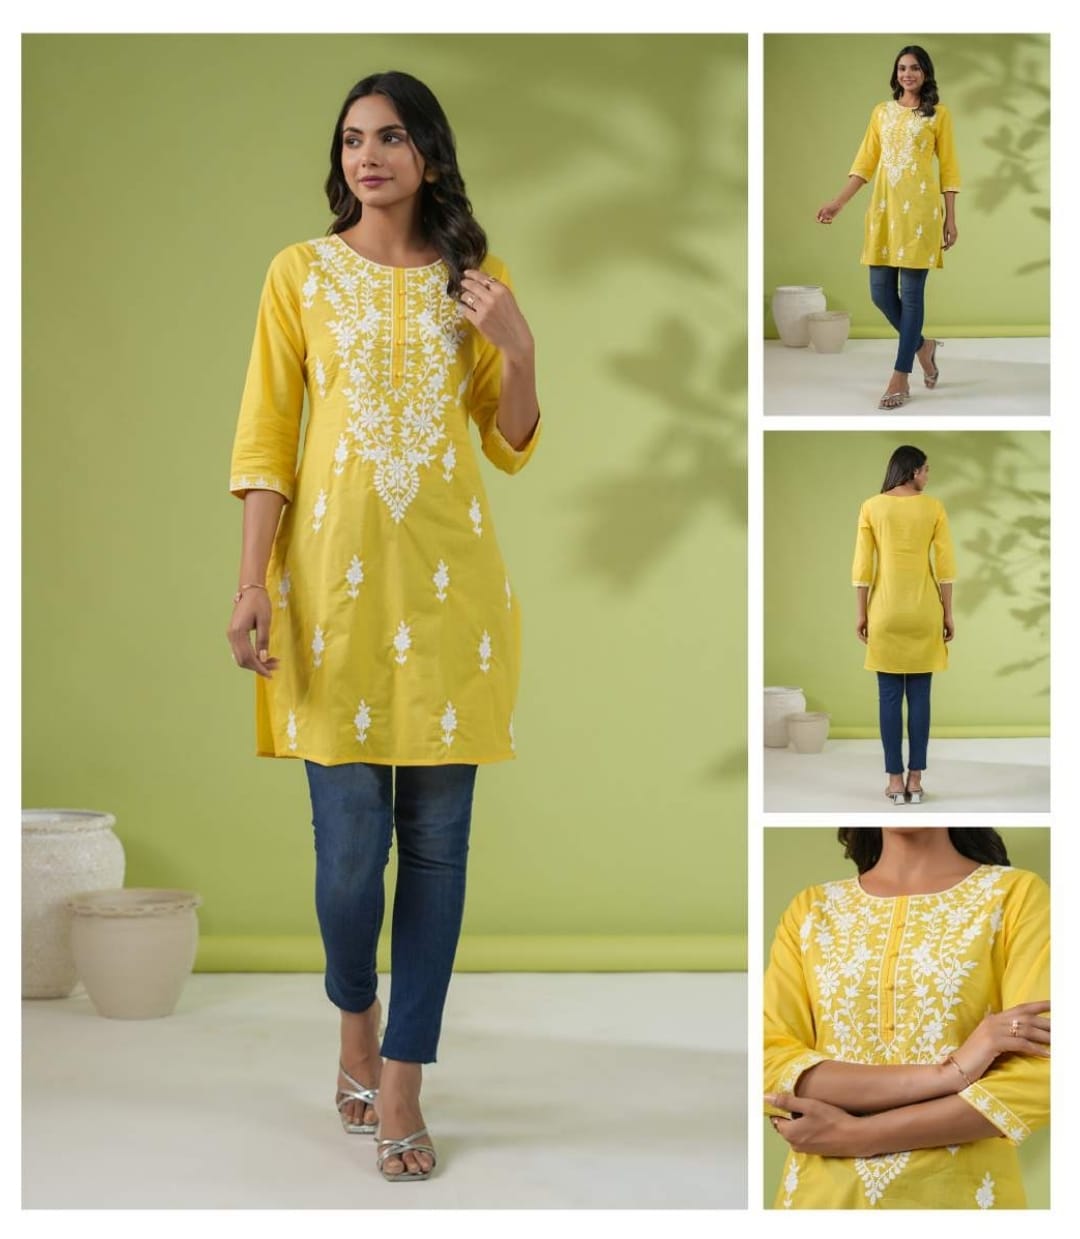 Cotton short kurti with chikan embroidery in yellow